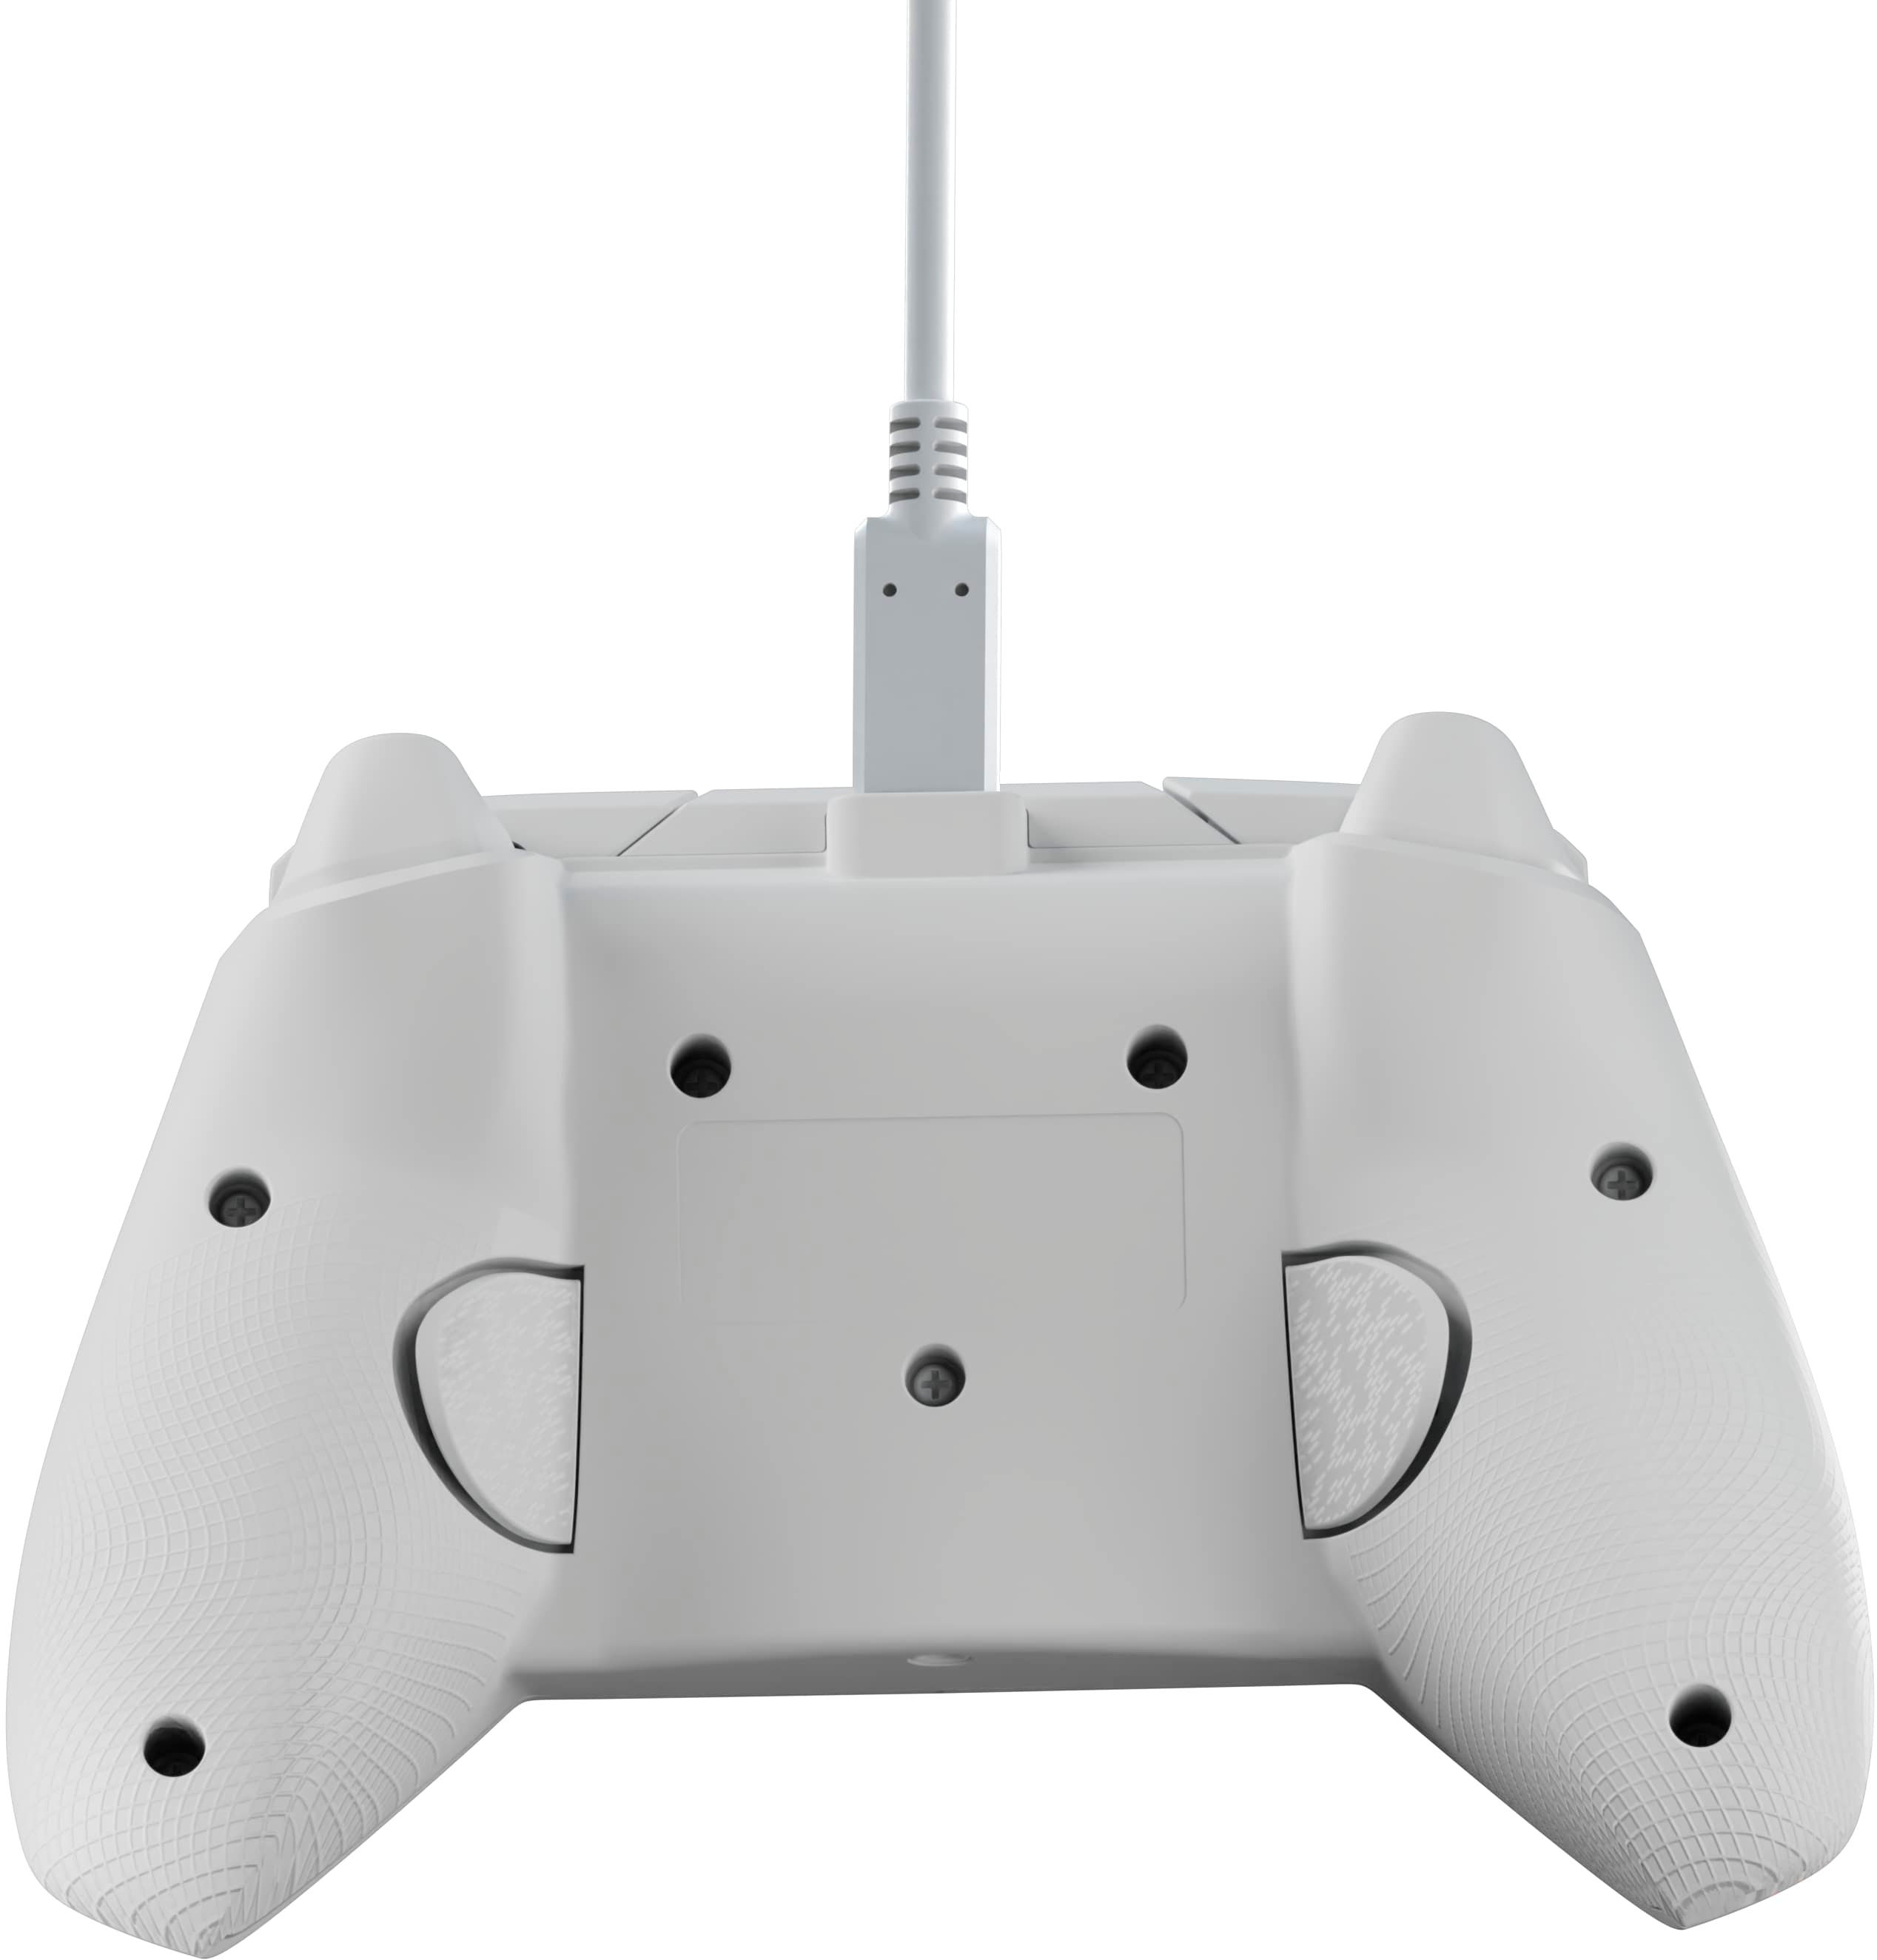 PDP Wired Controller – Electric White & Yellow - Microsoft Xbox One